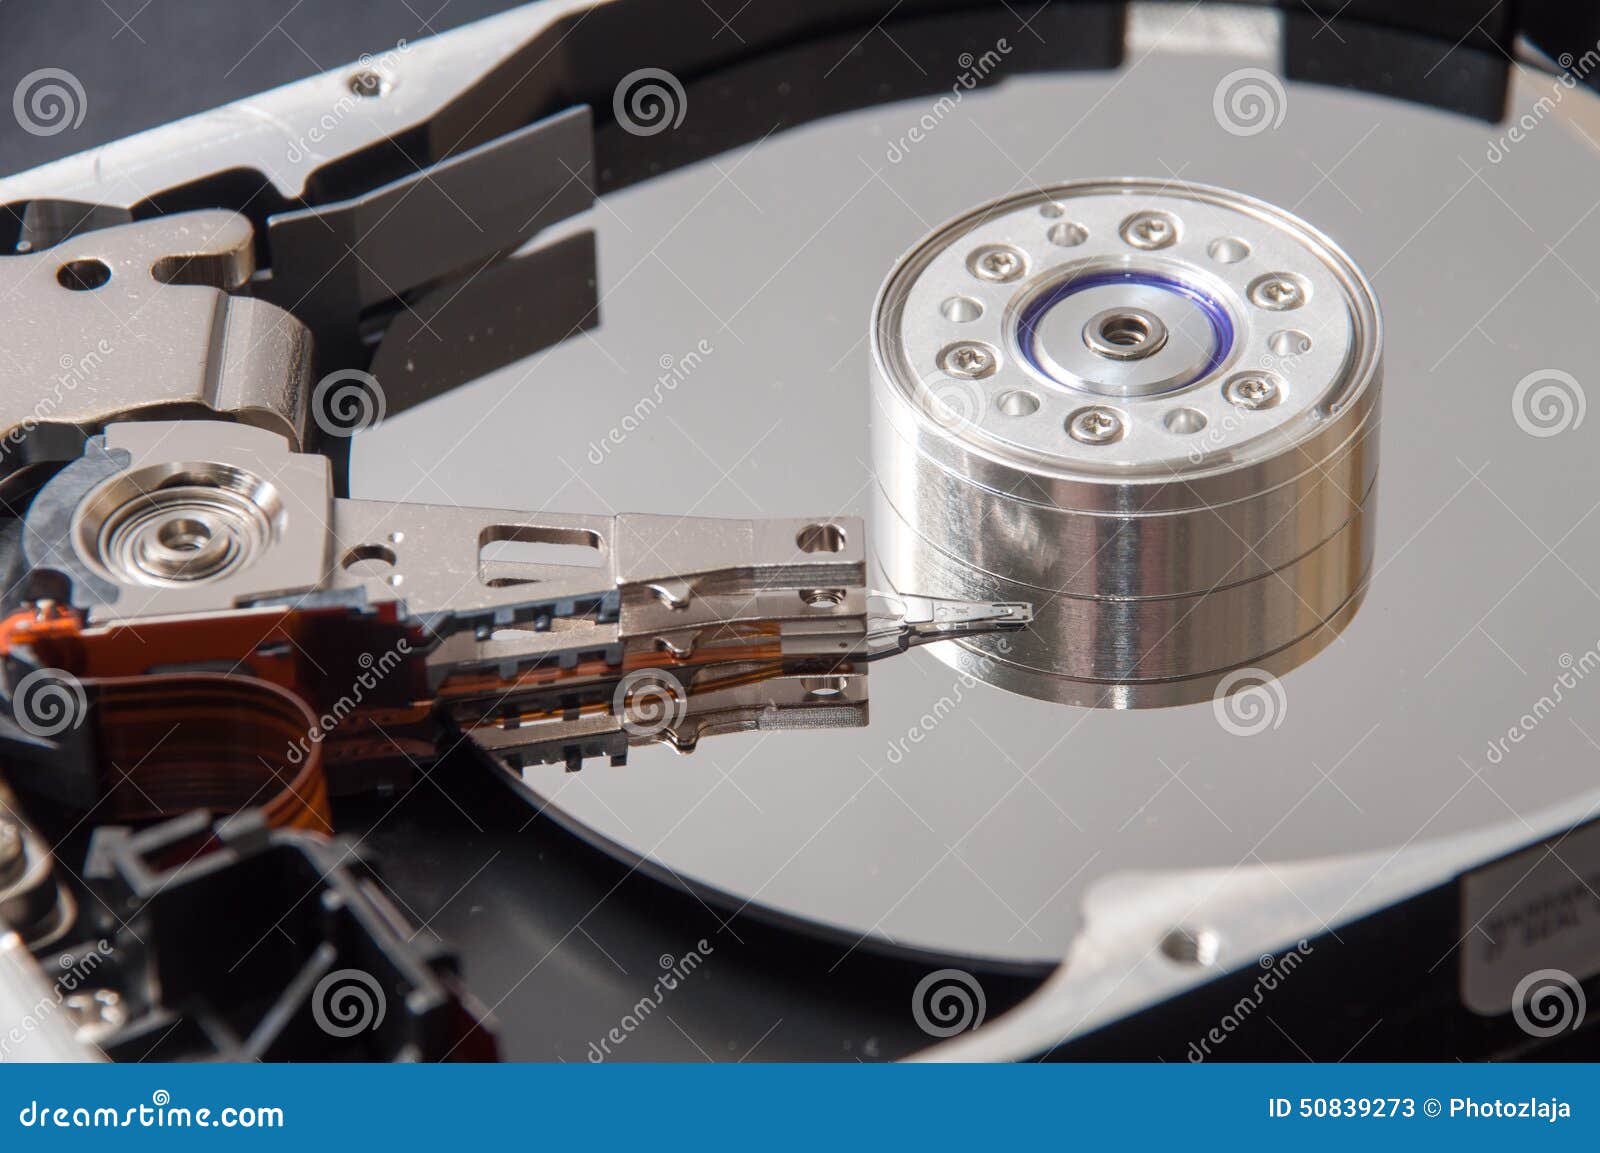 innovation Quadrant Spooky The Interior of the Hard Disk on a Black Background Stock Image - Image of  repairing, desktop: 50839273